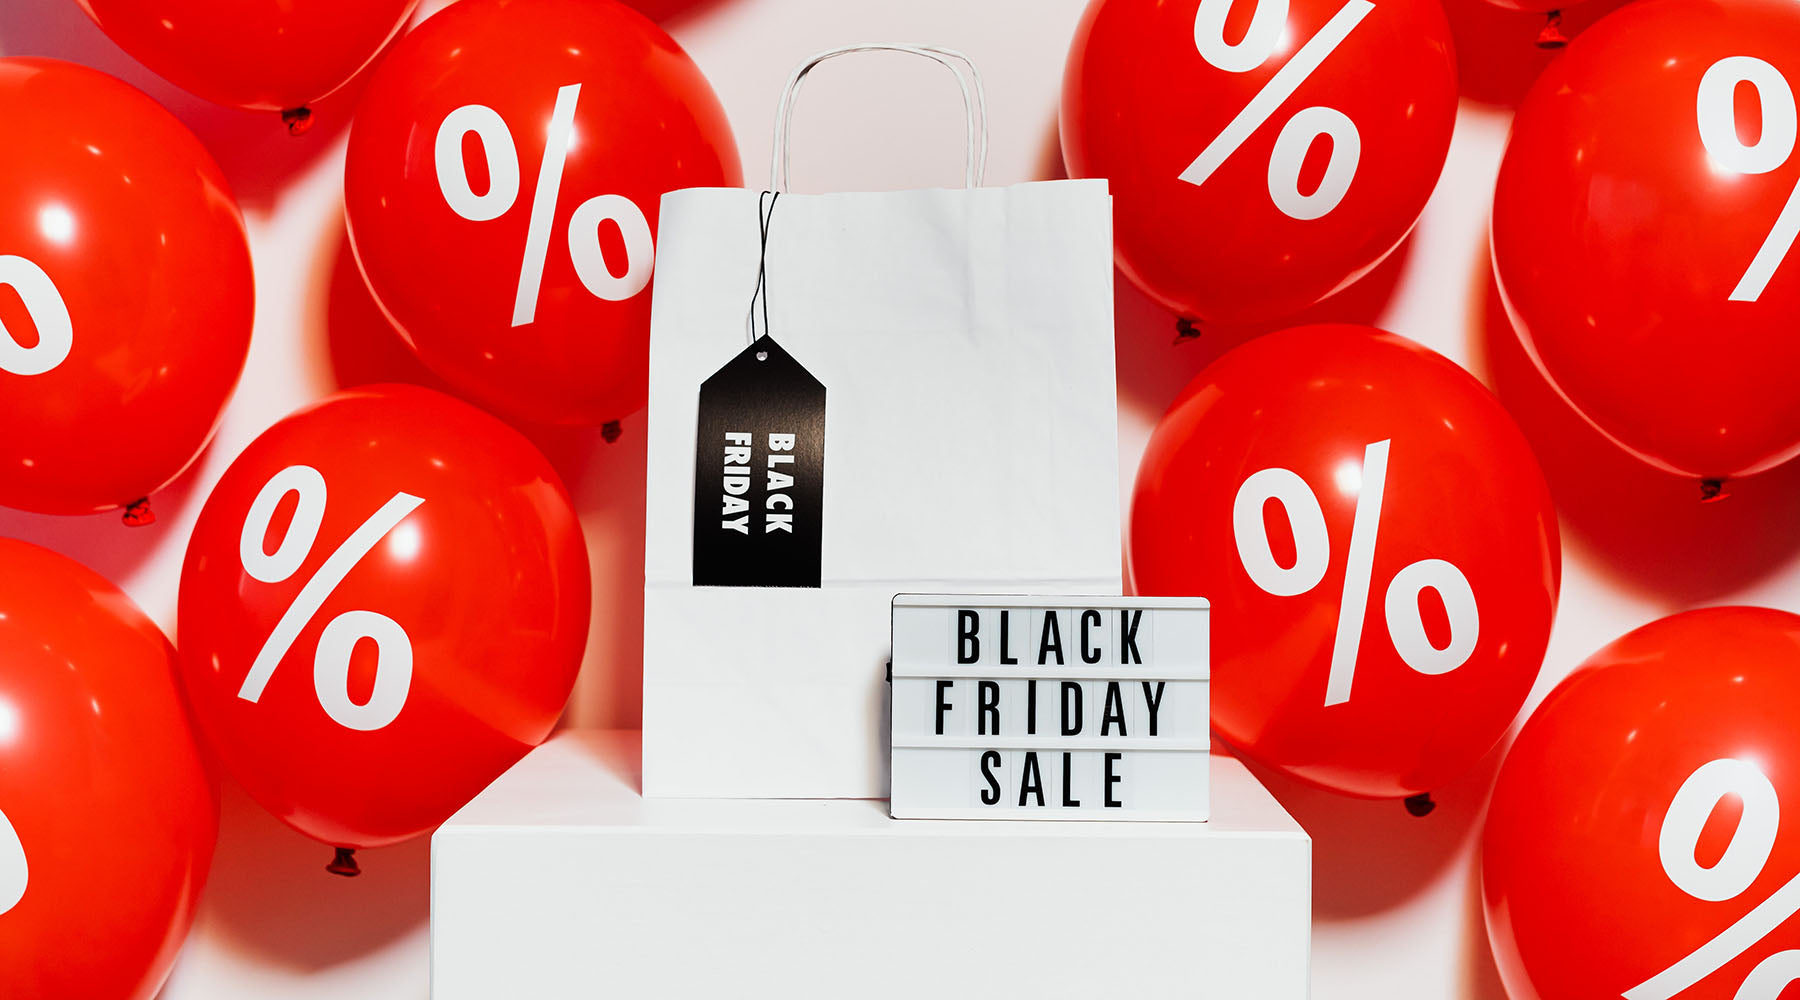 red-and-white-balloons-with-sign-that-says-black-friday-sale